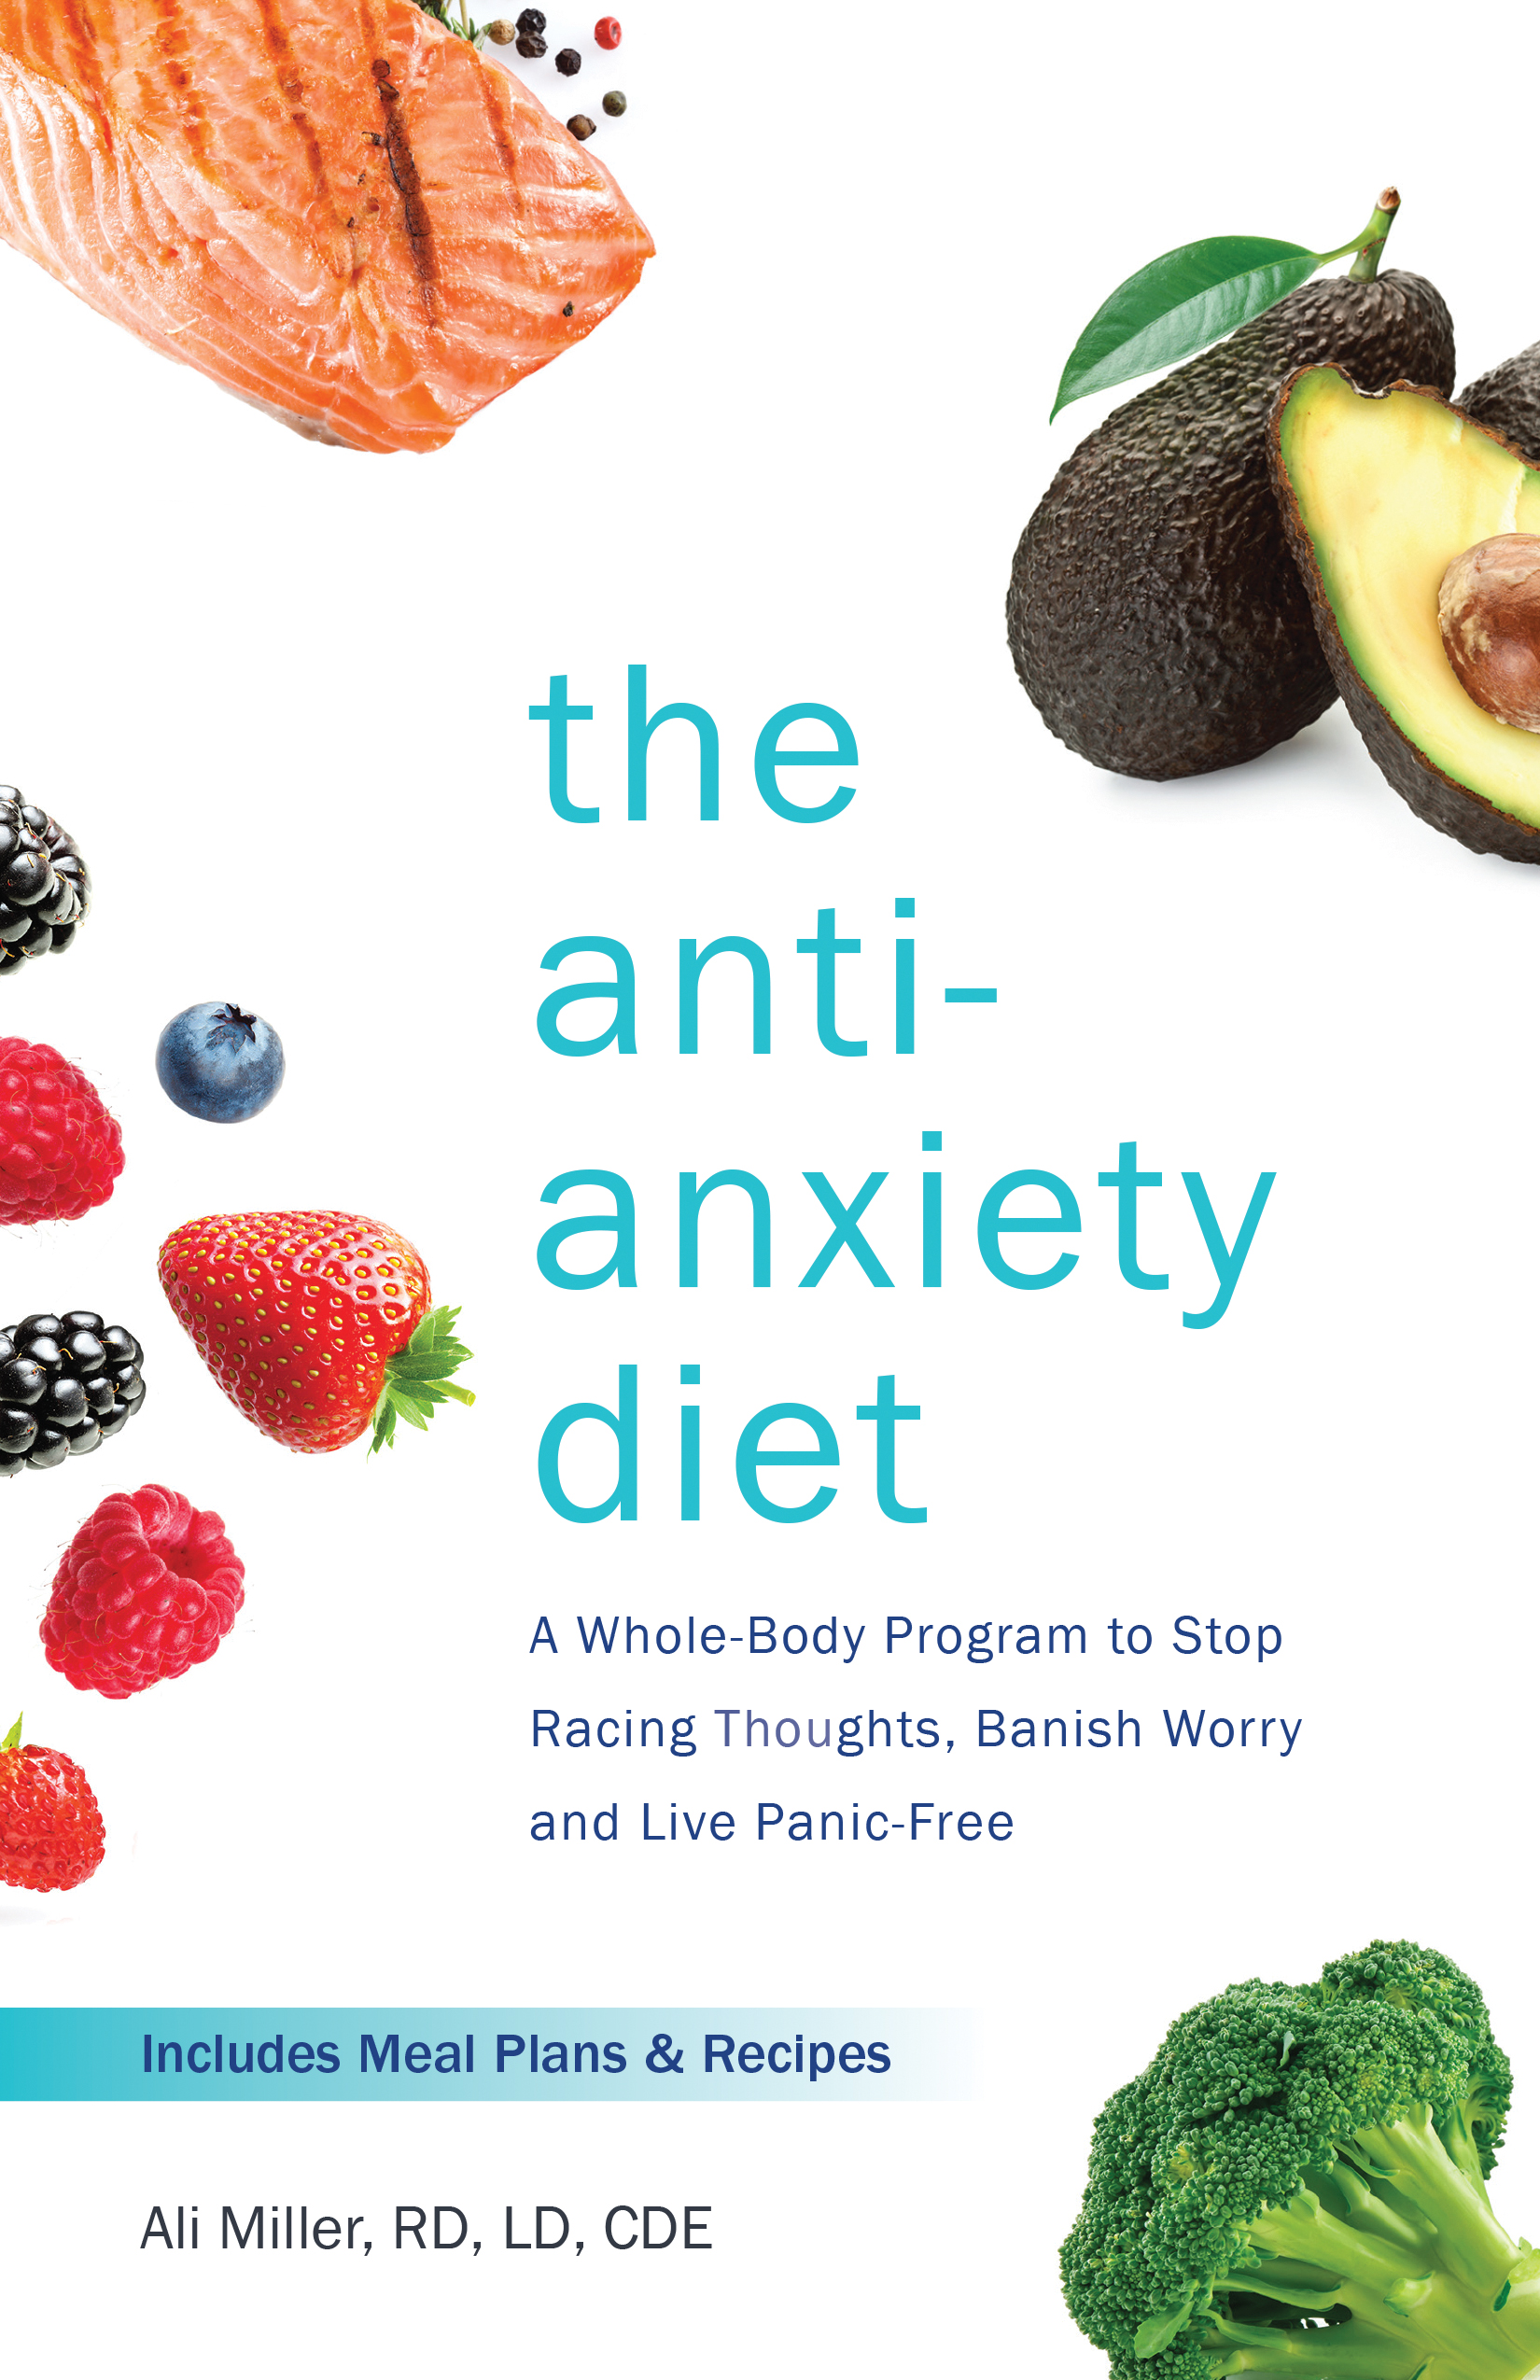 Image Of Nutrition For Anxiety Health